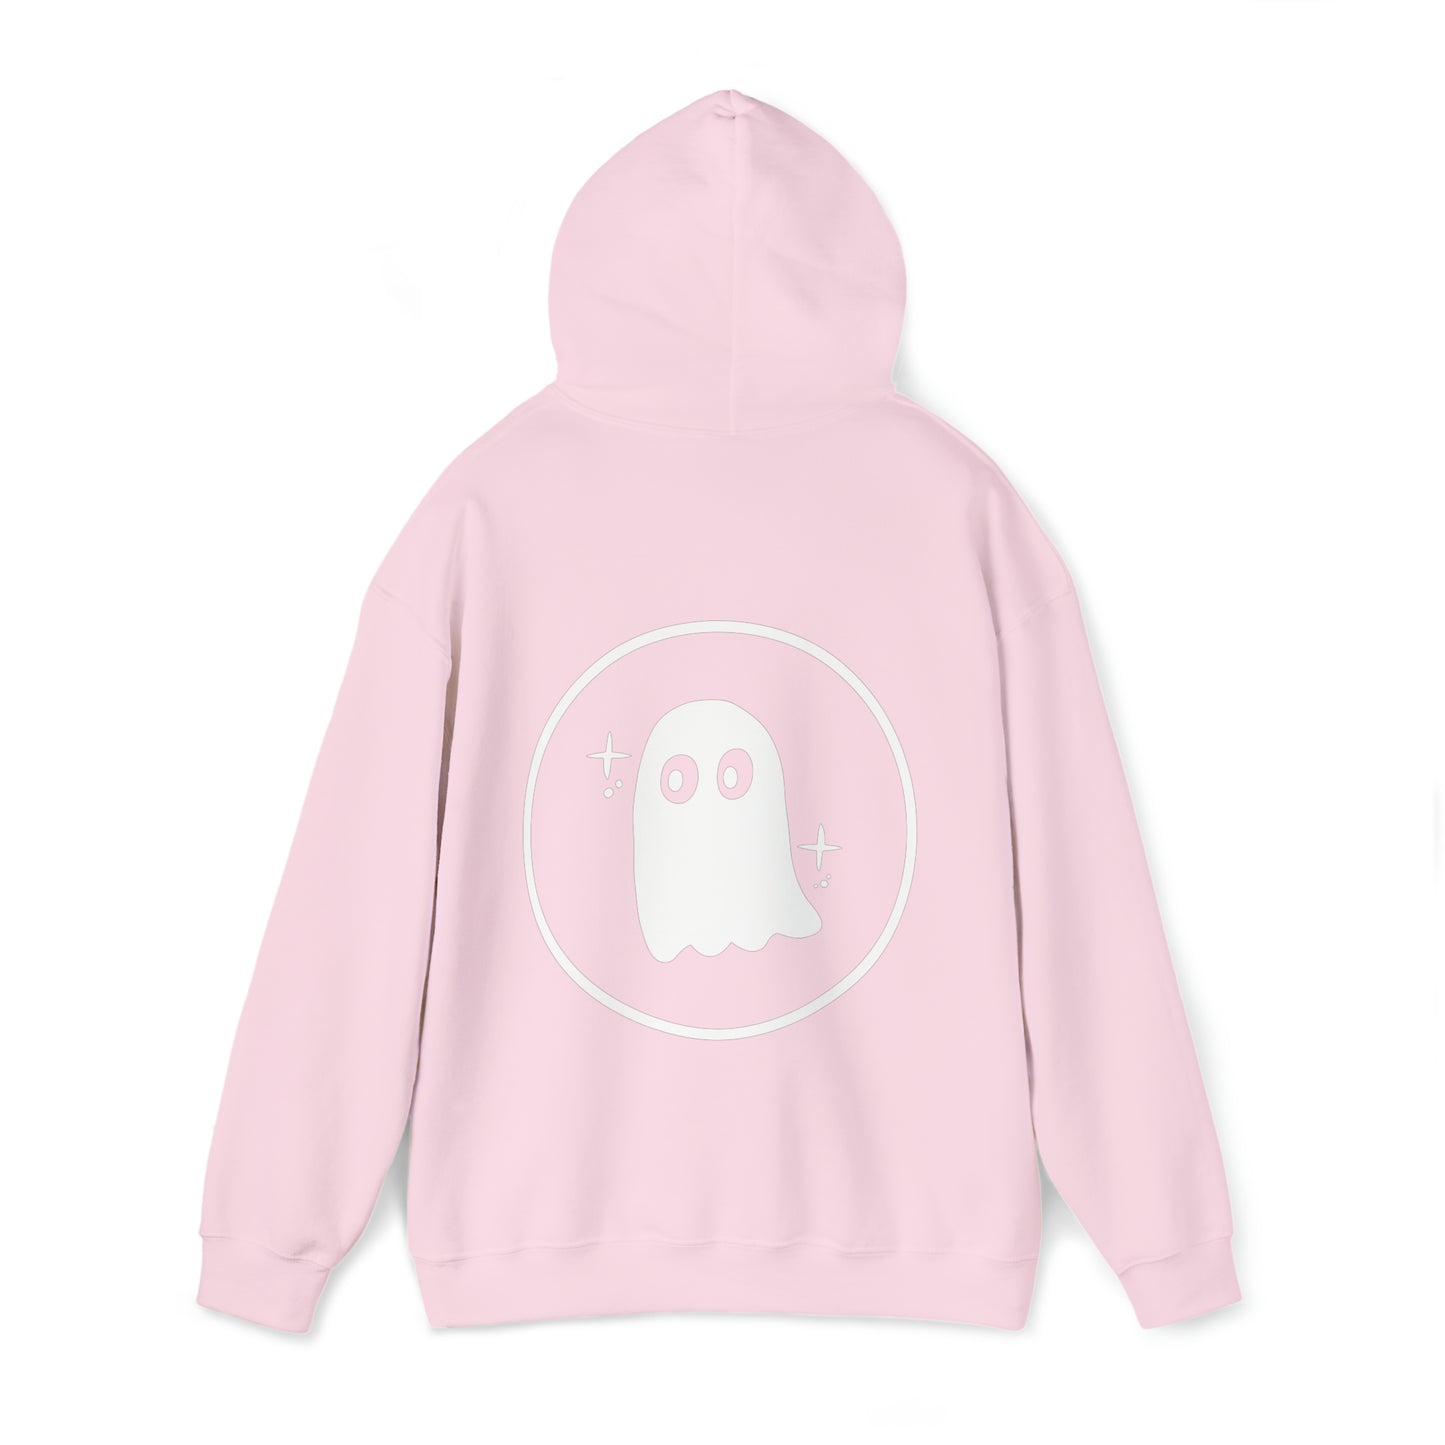 Chill Ghost - Unisex Hoodie